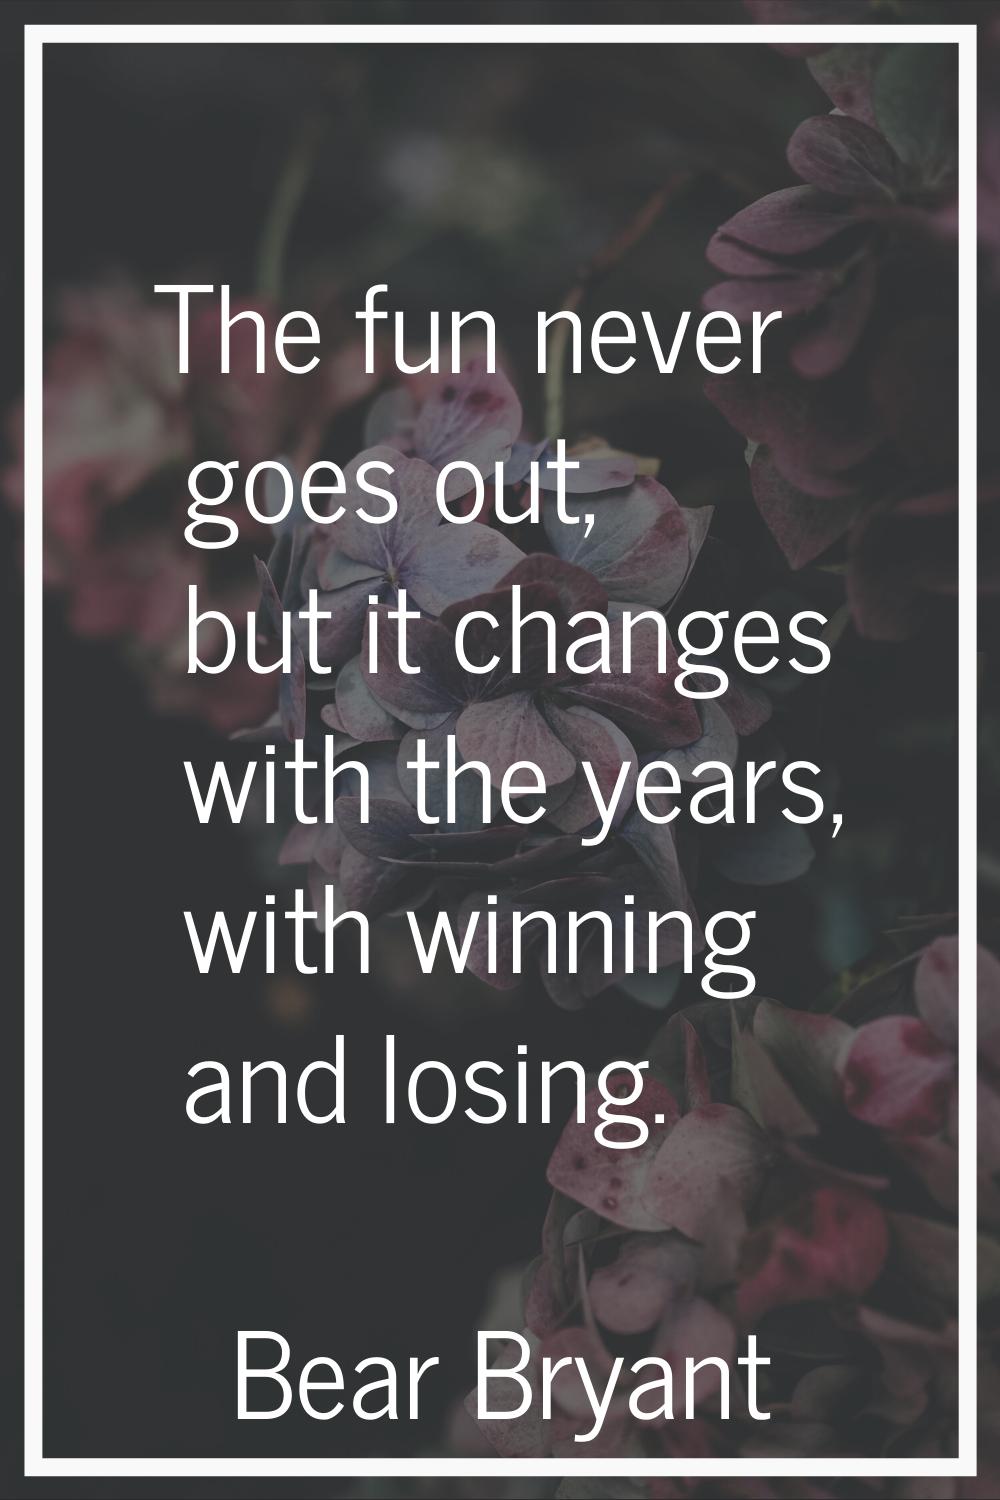 The fun never goes out, but it changes with the years, with winning and losing.